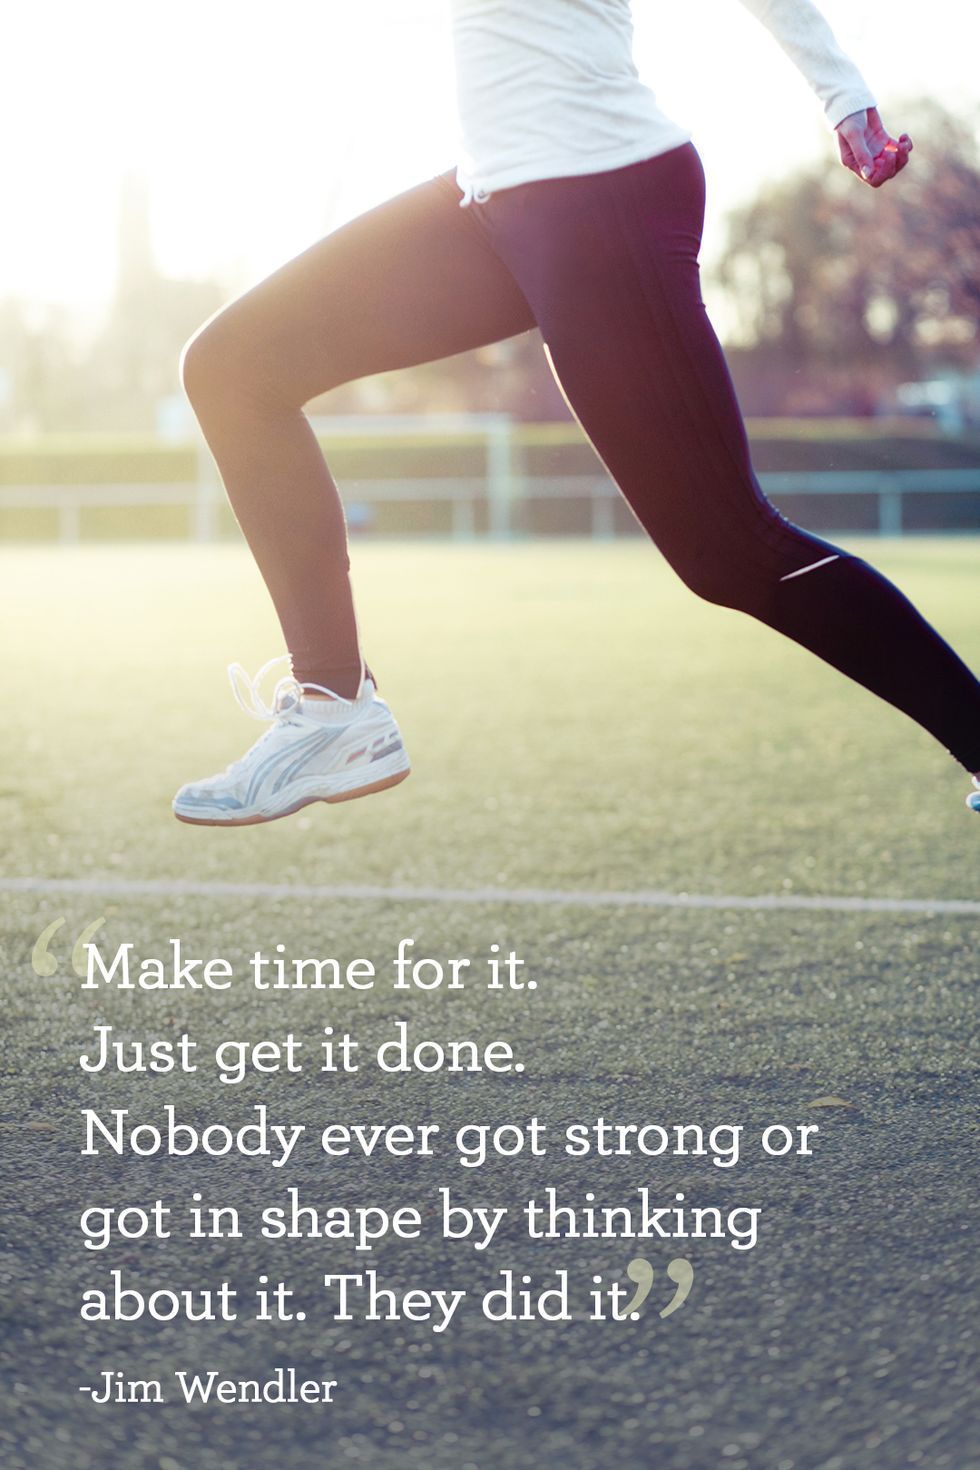 20 Inspirational Quotes To Get You Motivated For The Gym (Plus, 3